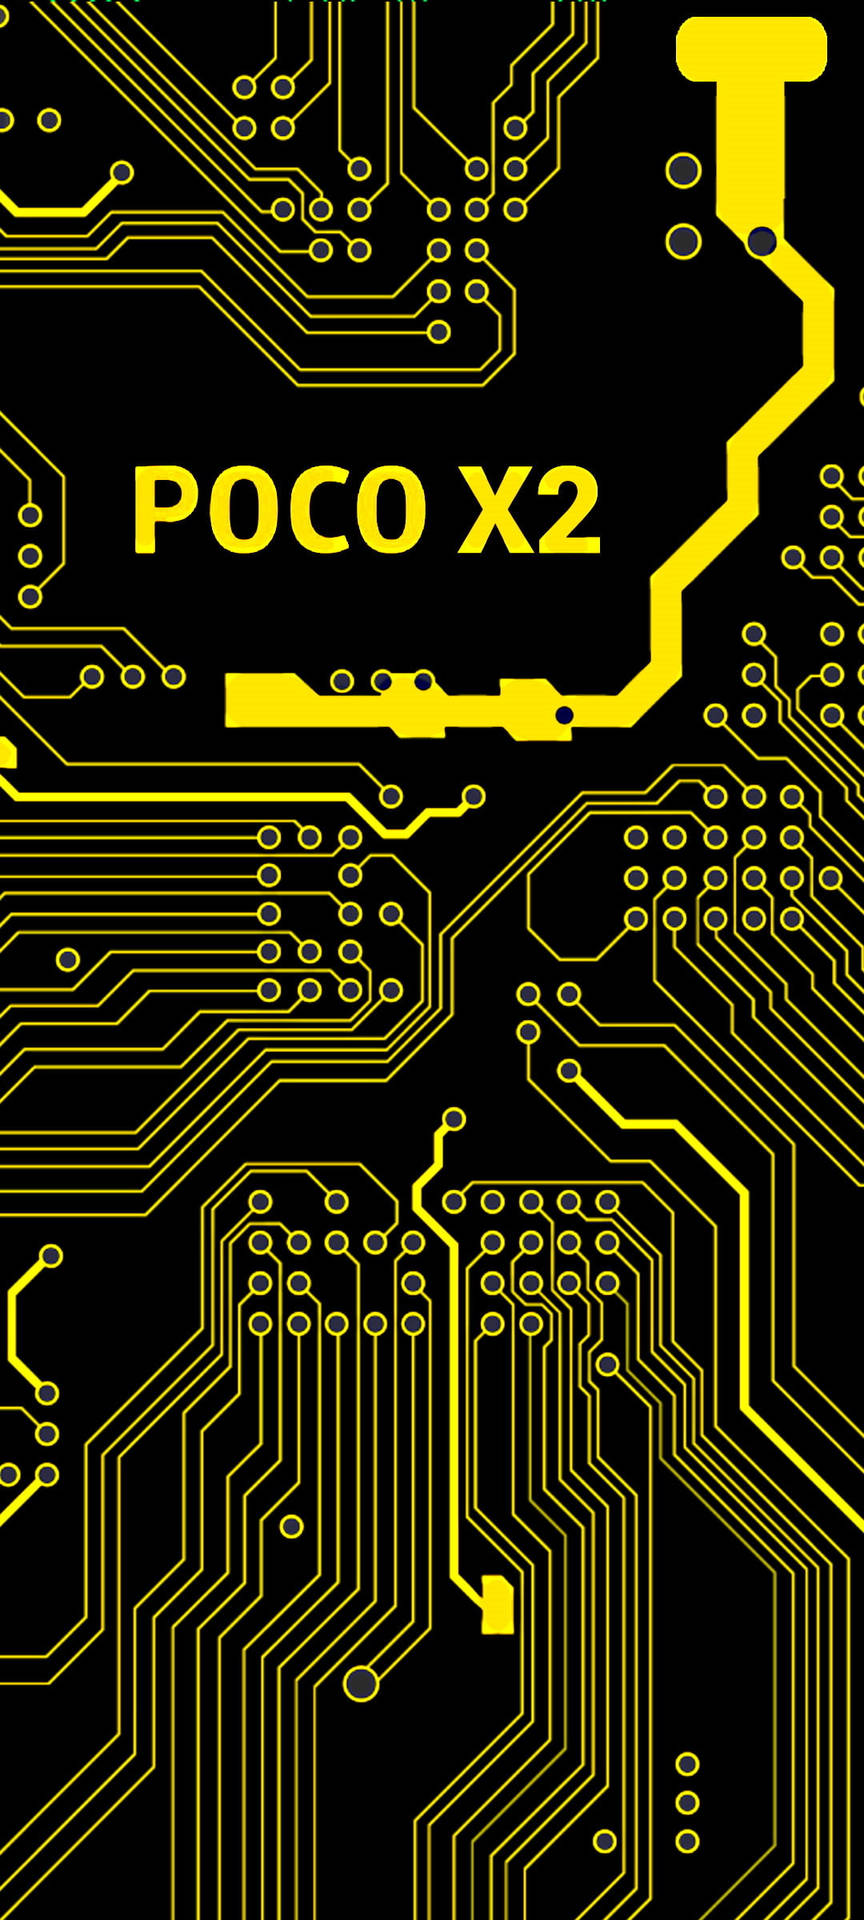 Poco X2 Smartphone With Controller Pattern Wallpaper